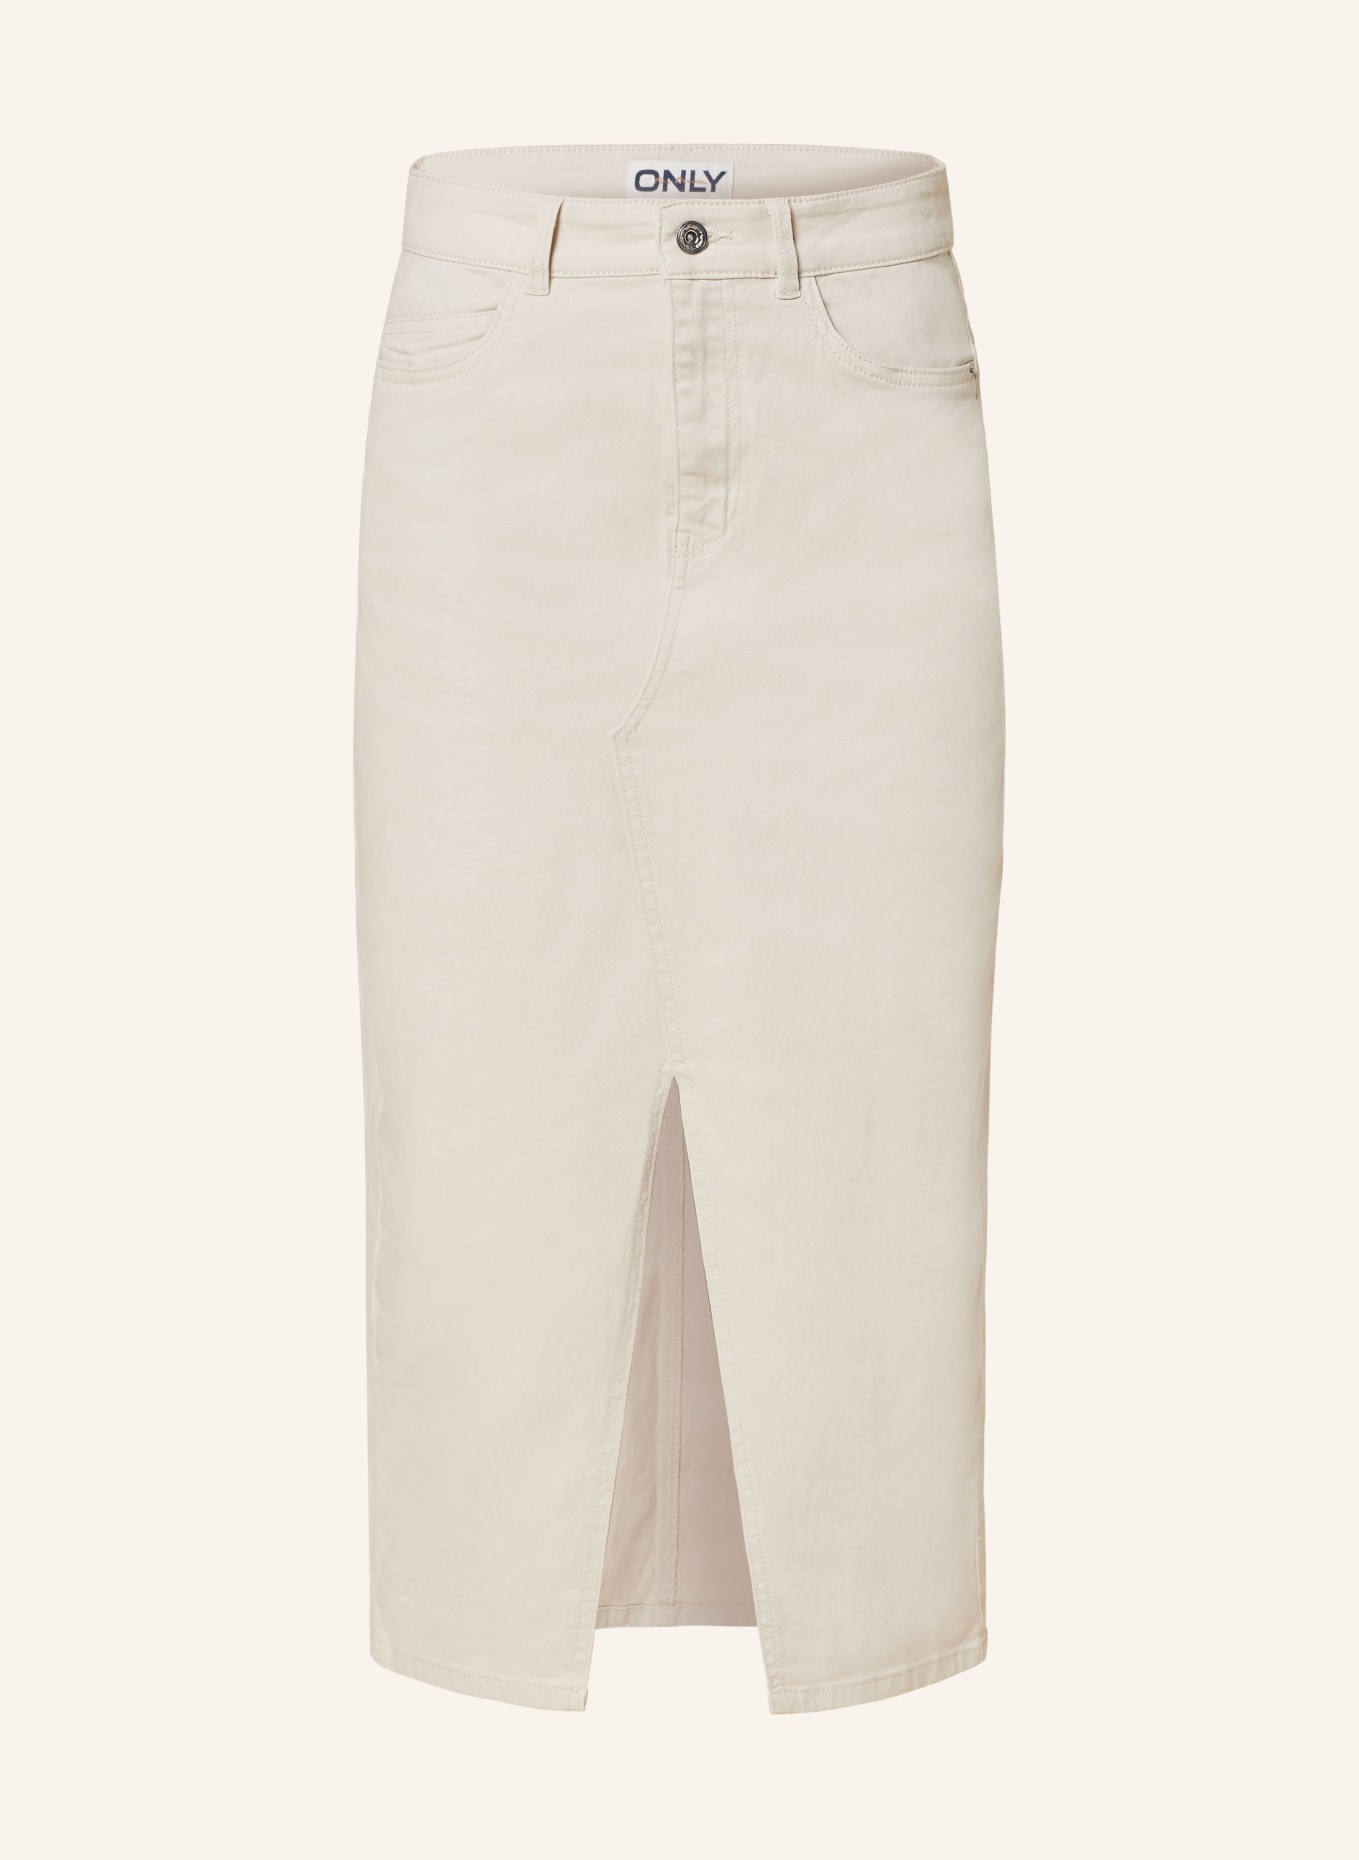 ONLY Skirt, Color: CREAM (Image 1)